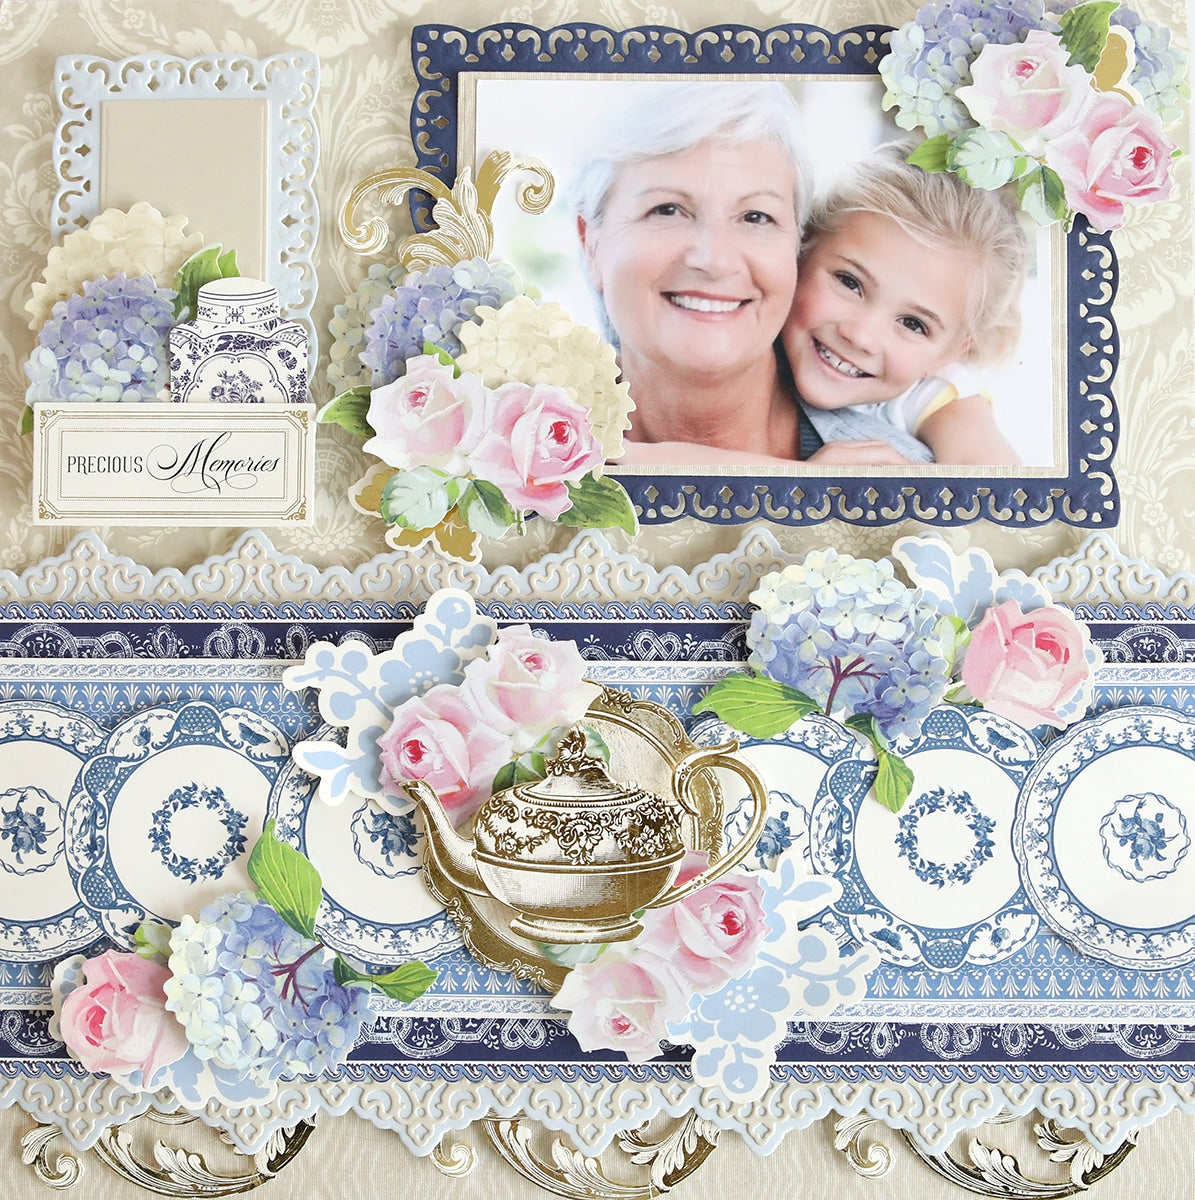 anna and blue paperie: {Giveaway} $100 Gift Certificate to Marye